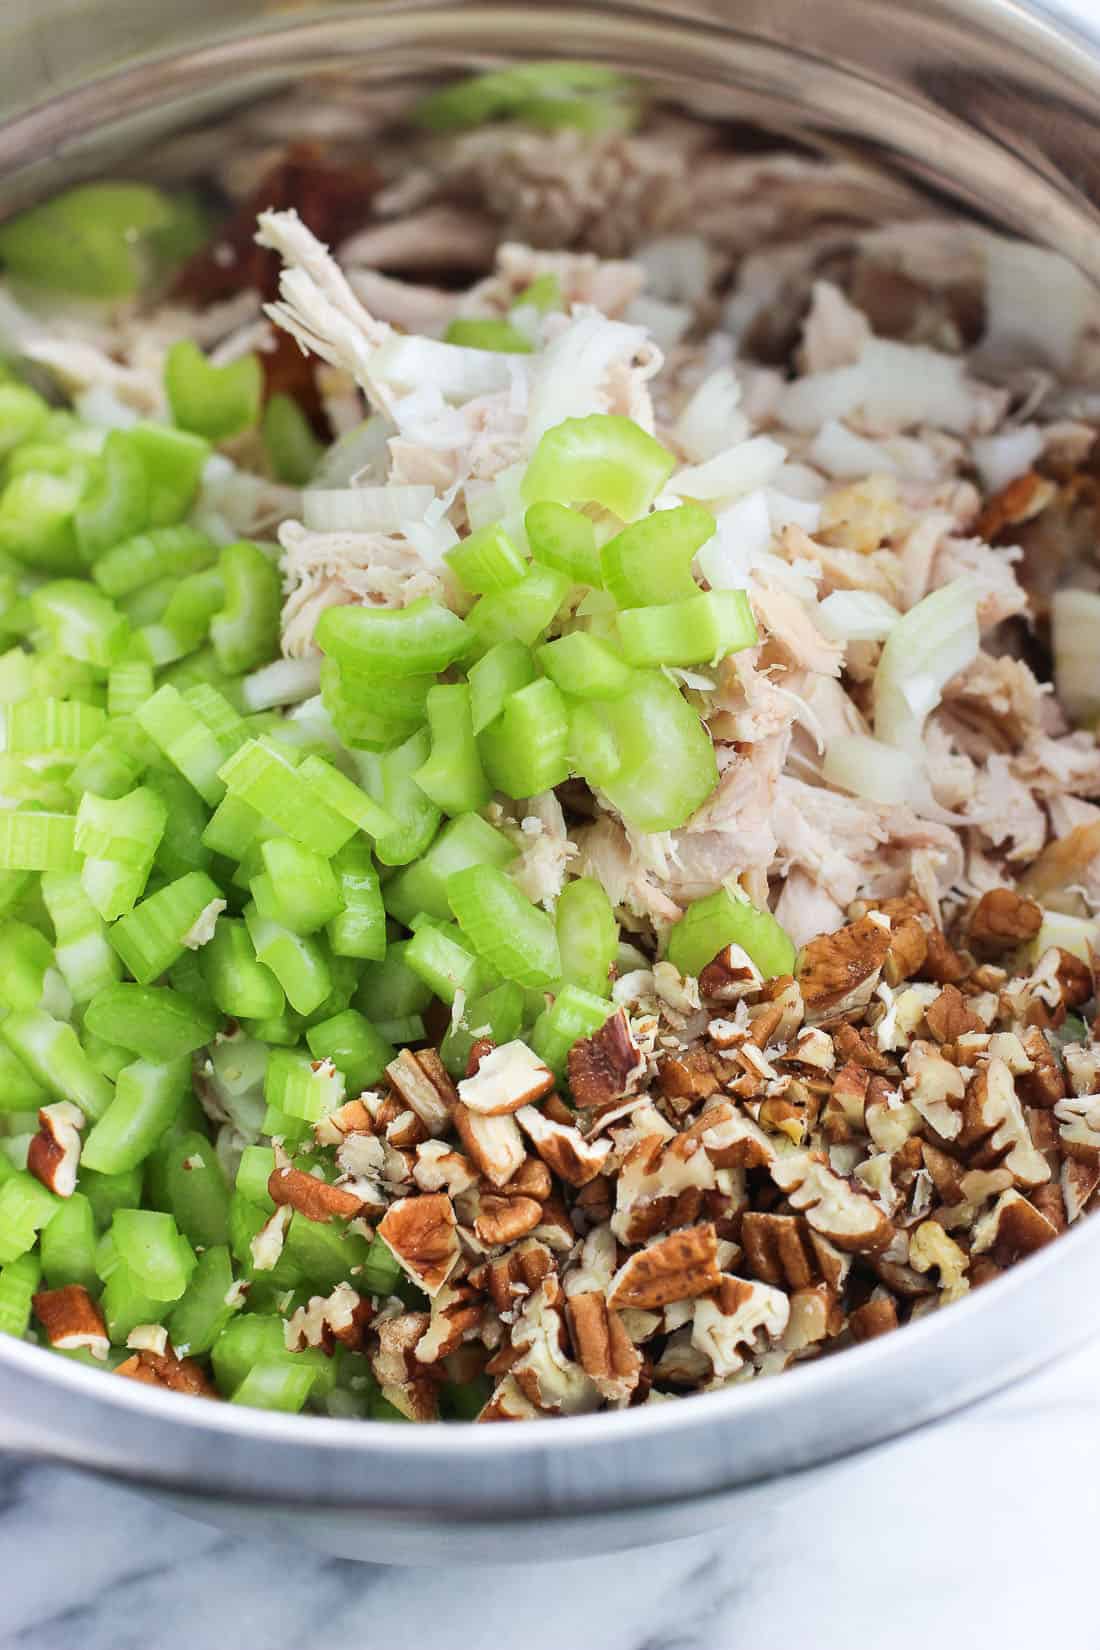 Chicken, pecans, celery, and onion in a mixing bowl.